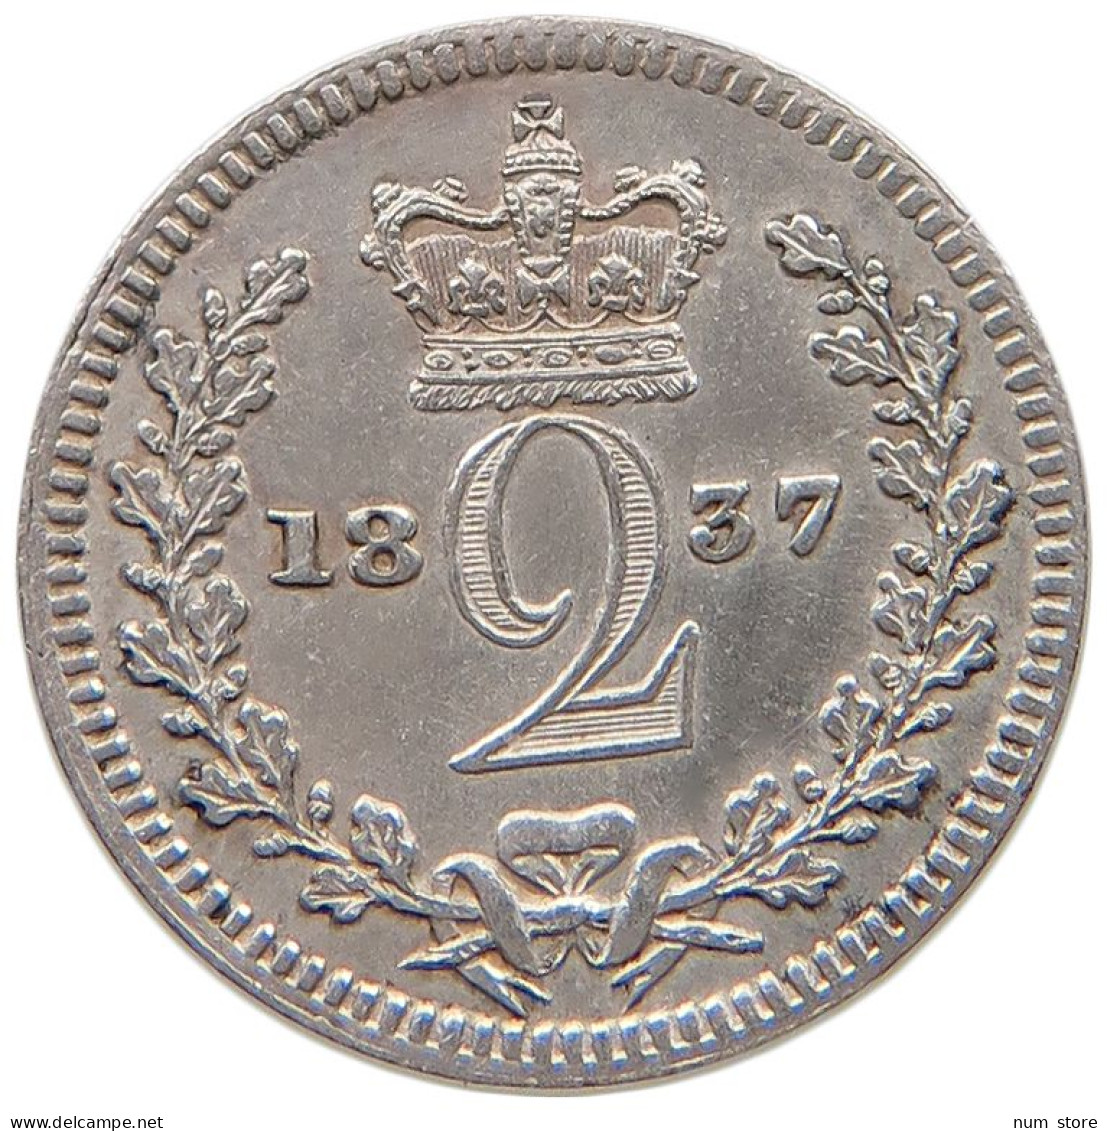 GREAT BRITAIN TWO PENCE 1837 Victoria 1837-1901 MAUNDY #t107 0515 - E. 1 1/2 - 2 Pence